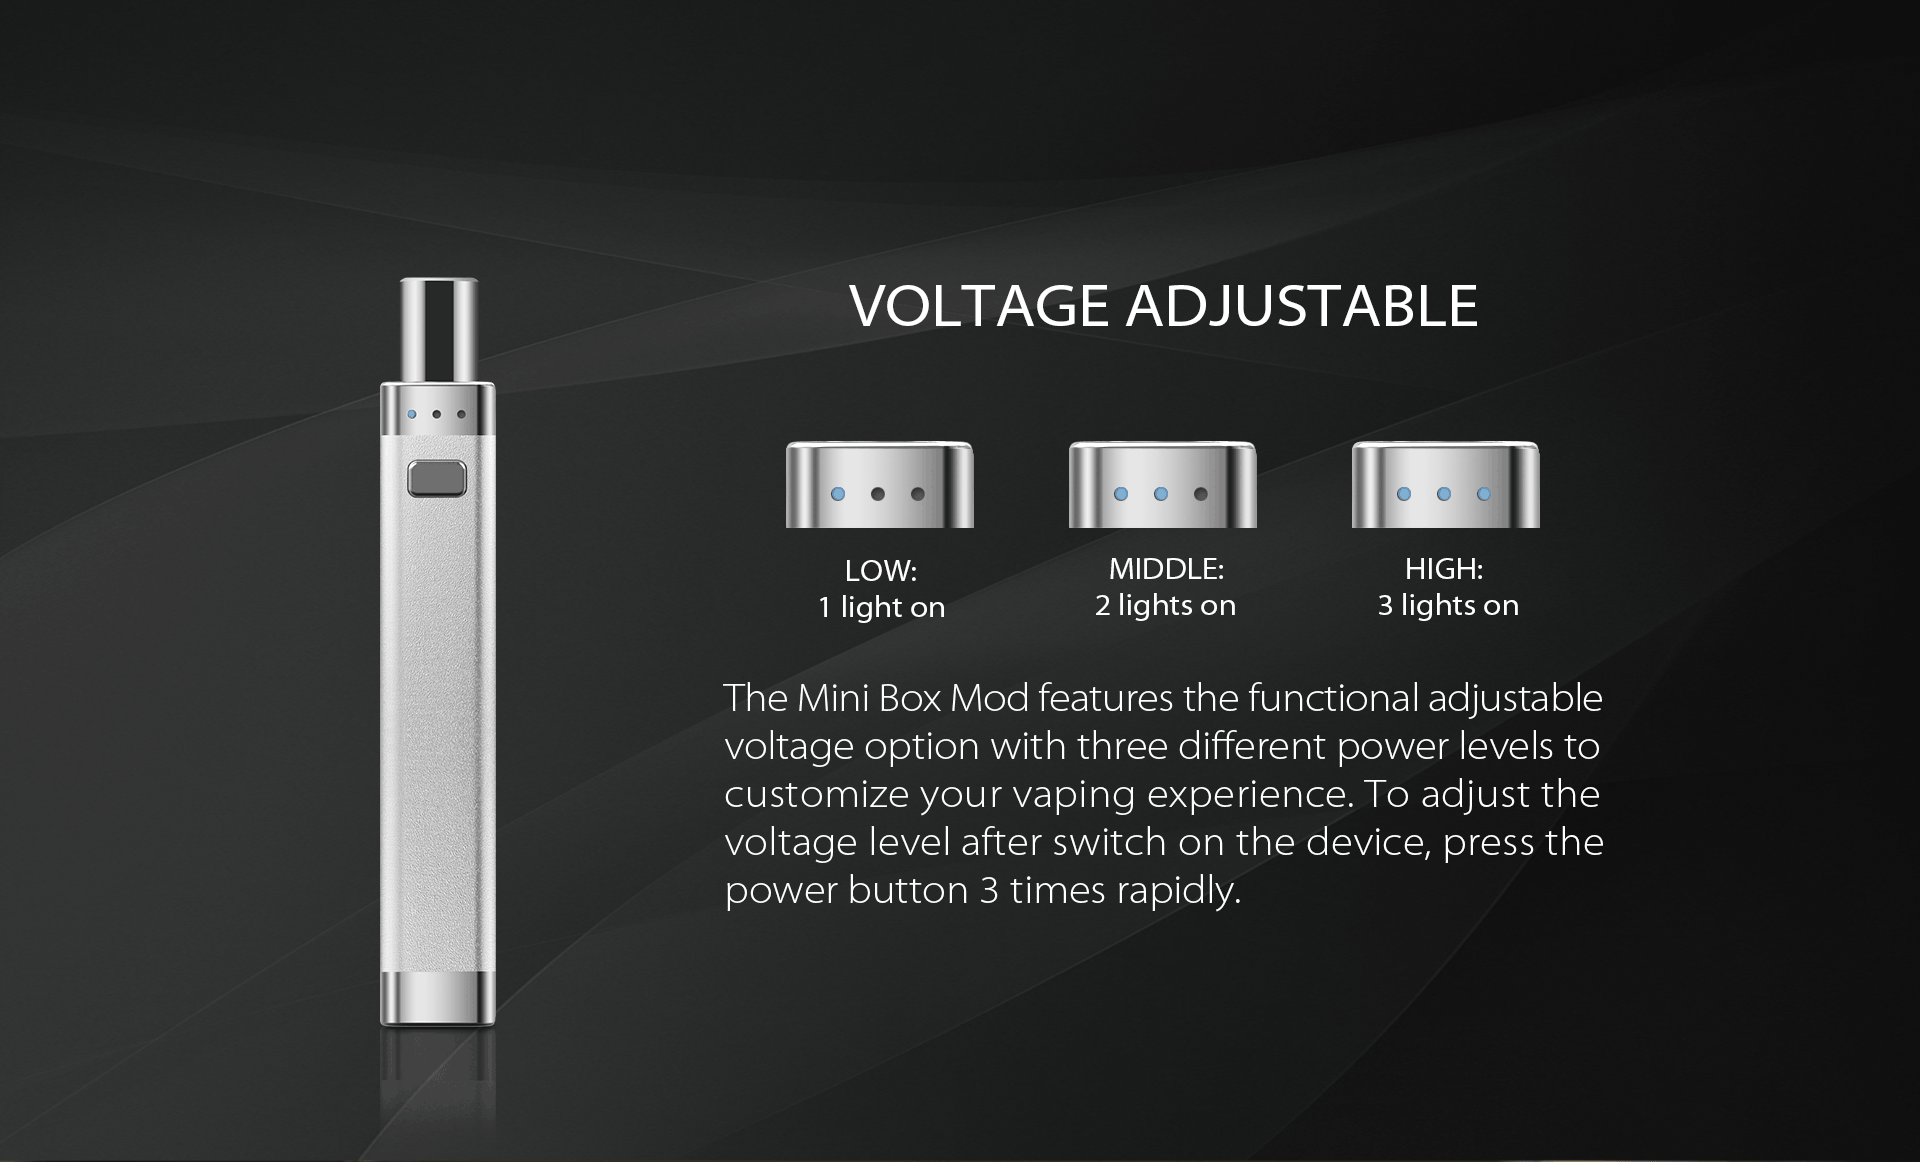 Yocan DeLux mini box mod features the functional adjustable voltage option with three power levels to customize your vaping experience.